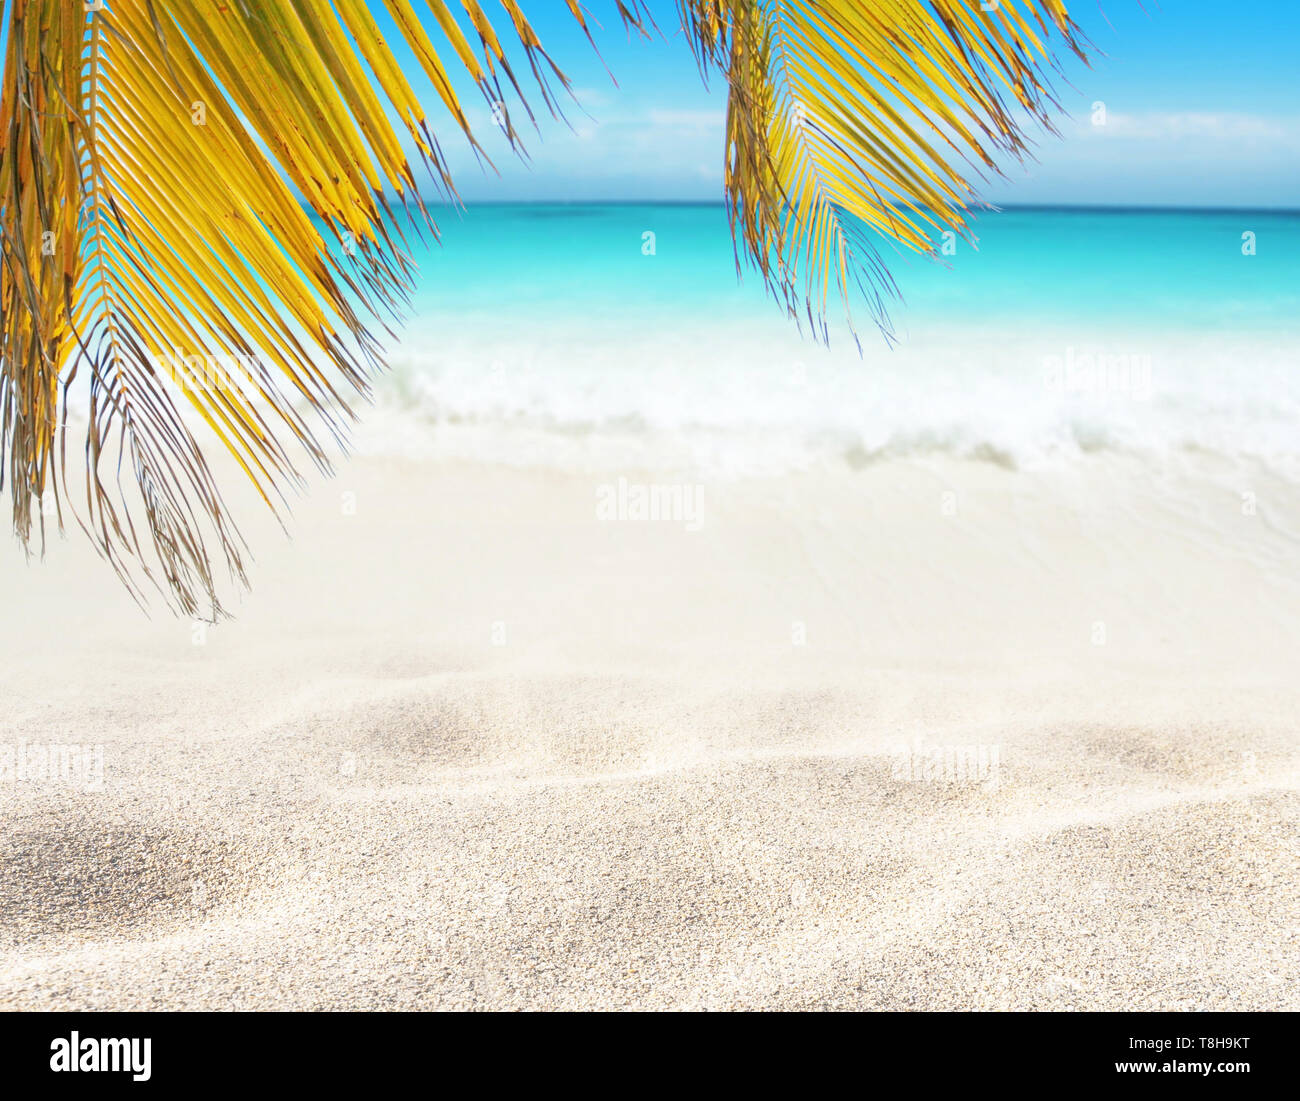 Coconut palm leaves hanging over the sandy beach and bright turquoise ocean water. Tropical island paradise. Shore washing by the wave. Dream summer v Stock Photo